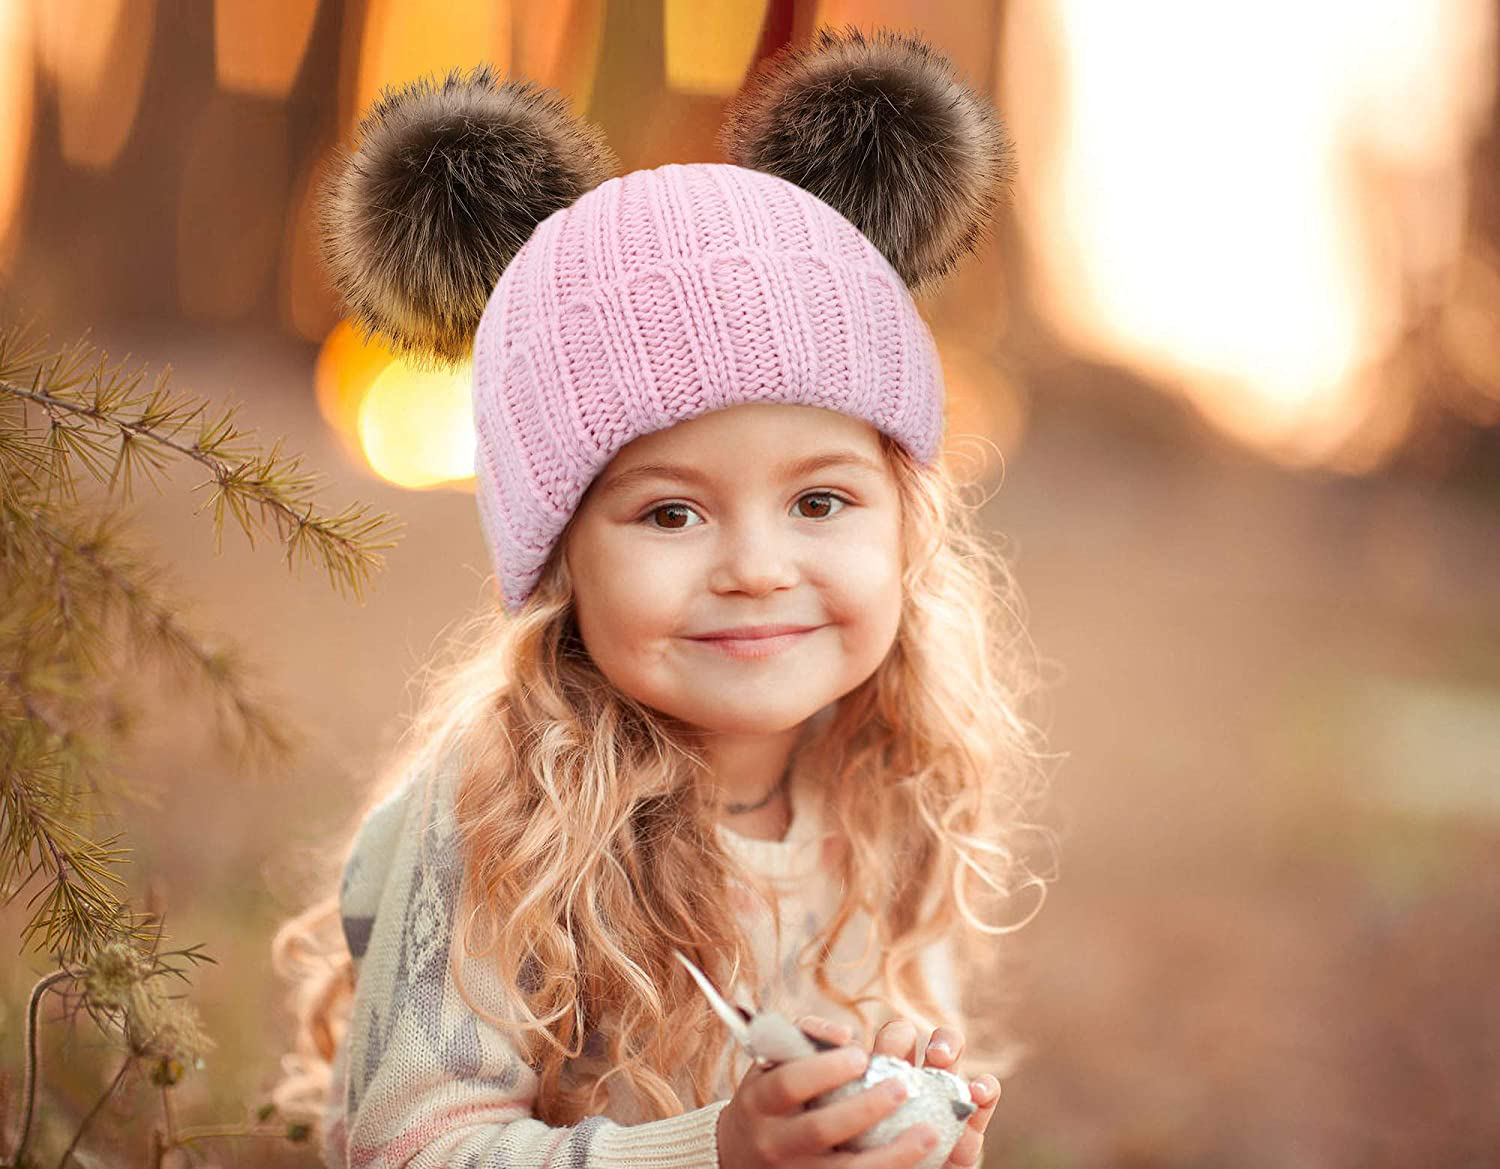 Simplicity Warm Kids Boys Girls Winter Hat with Pompom Ears Elastic Knitted Toddler Beanie Hats for Girls Boys